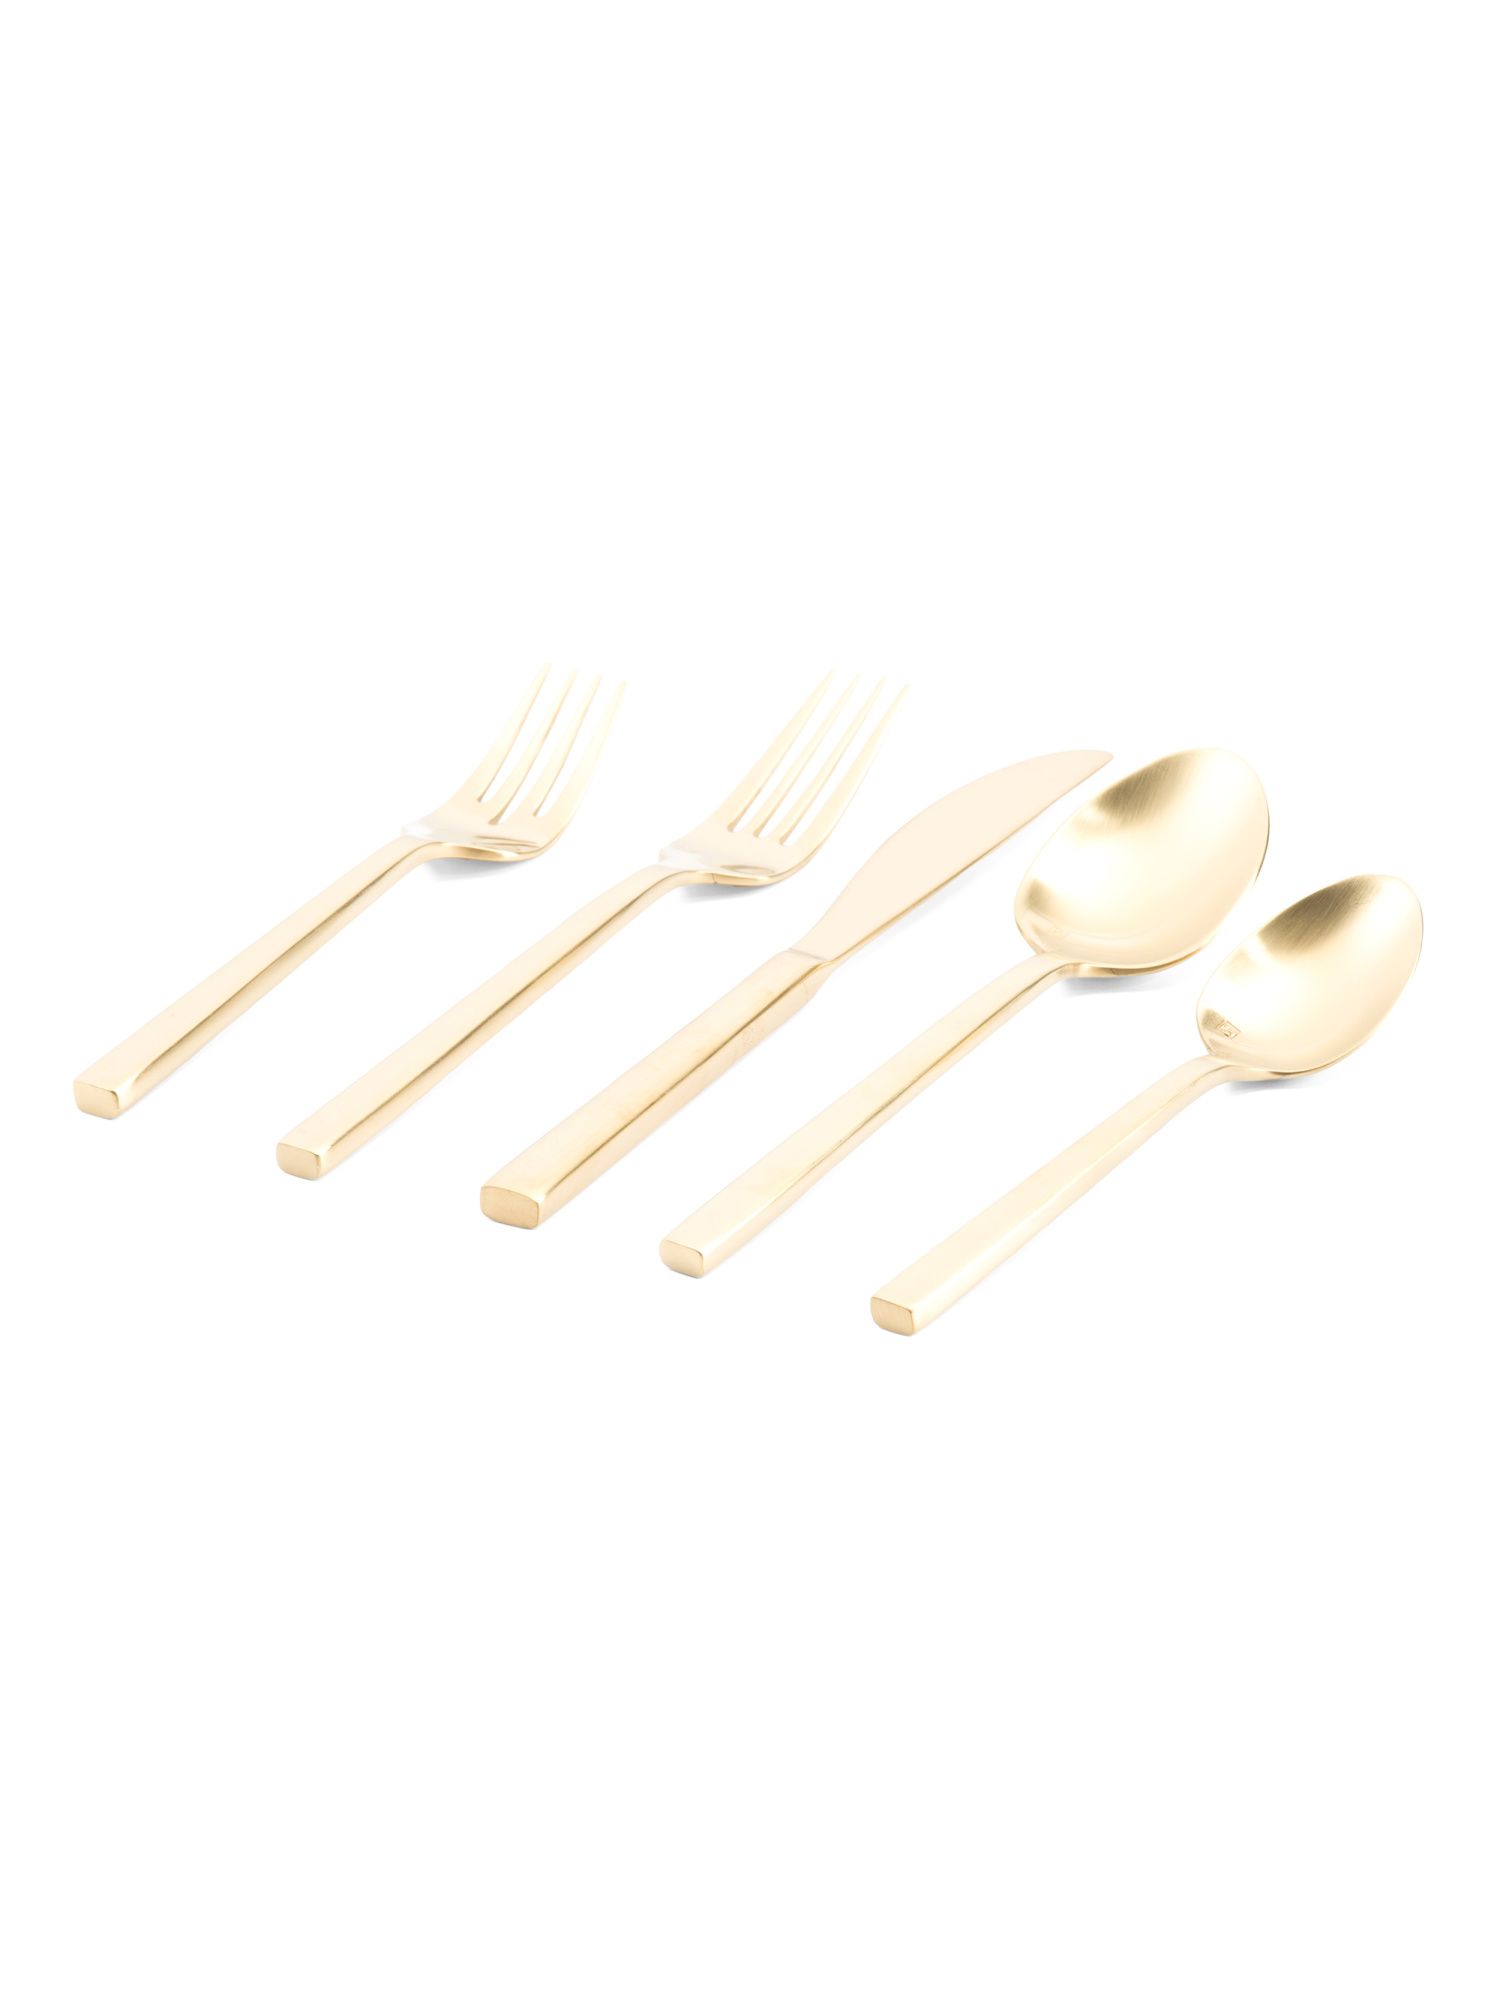 20pc Stainless Steel Brushed Arezzo Flatware Set | TJ Maxx